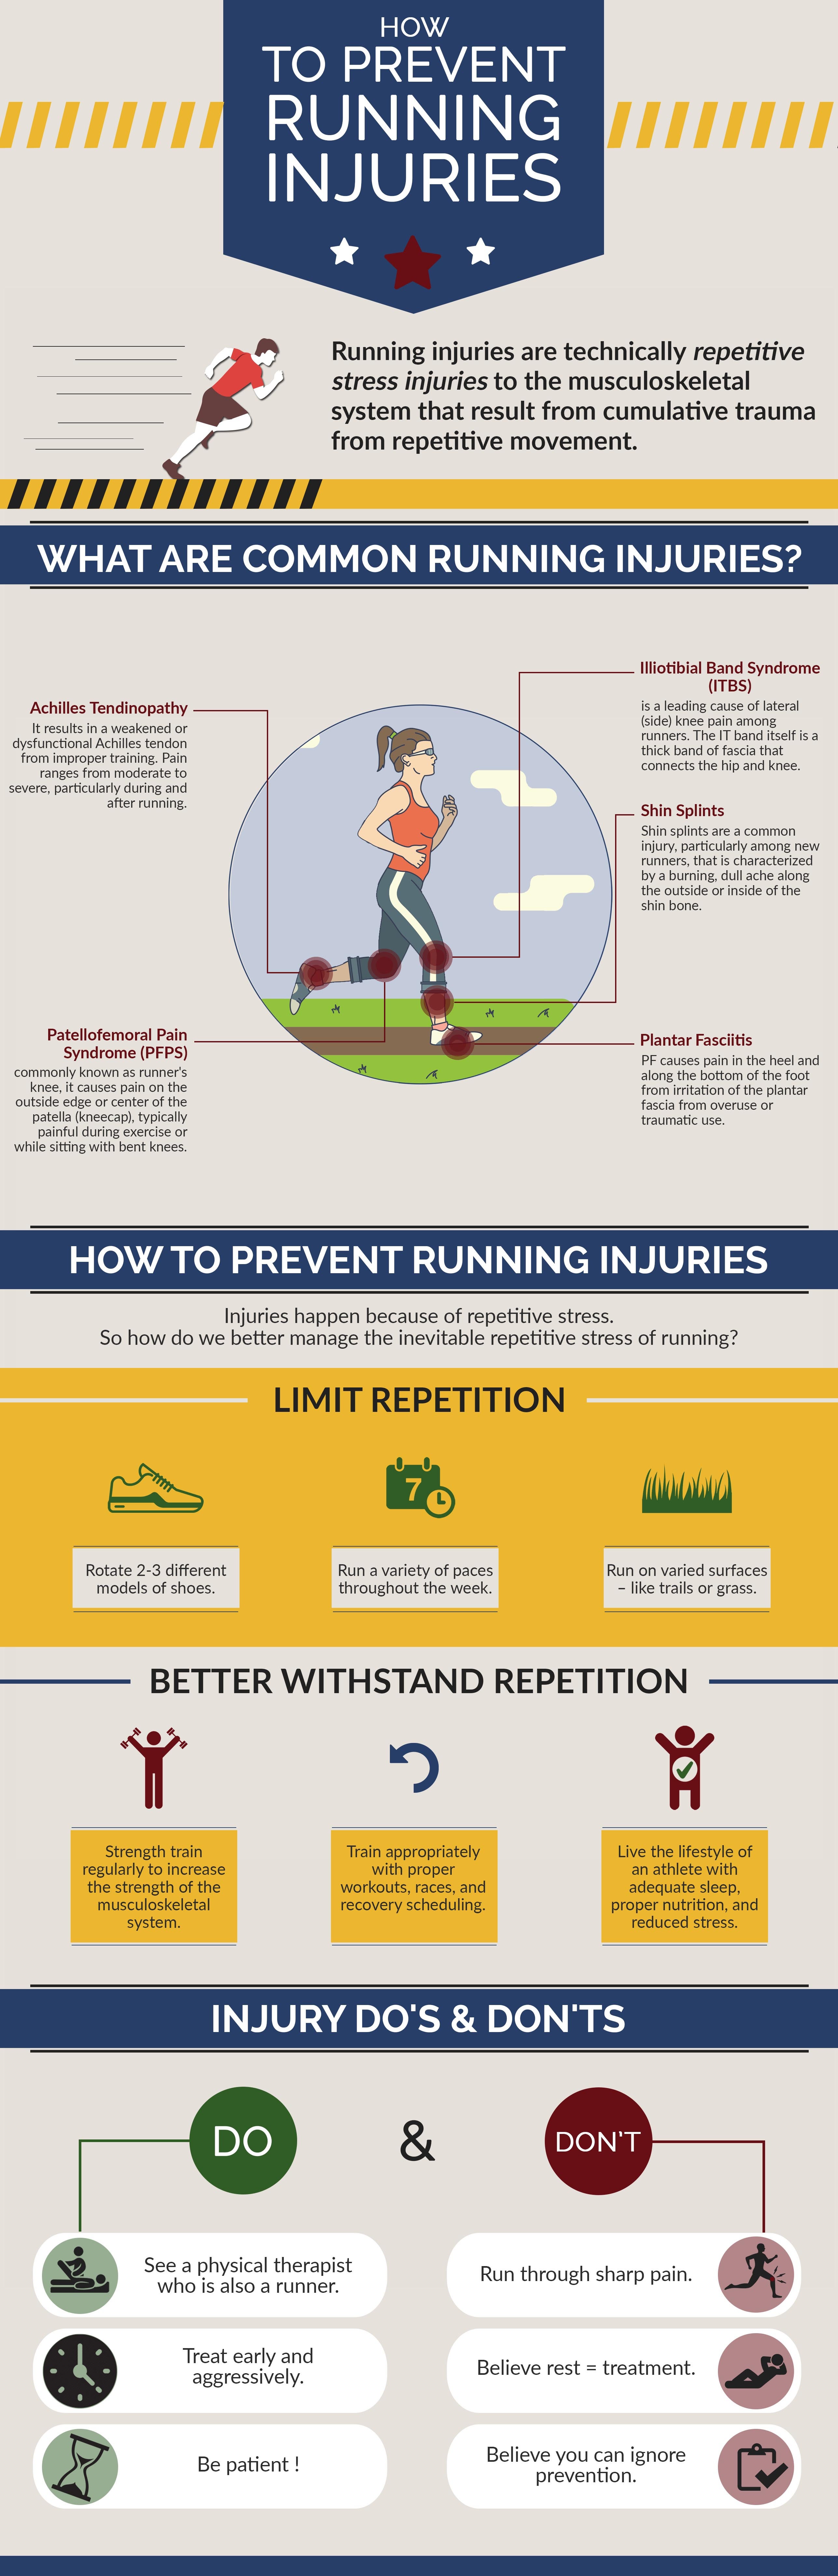 This Infographic Explains Common Running Injuries And How To Prevent Them